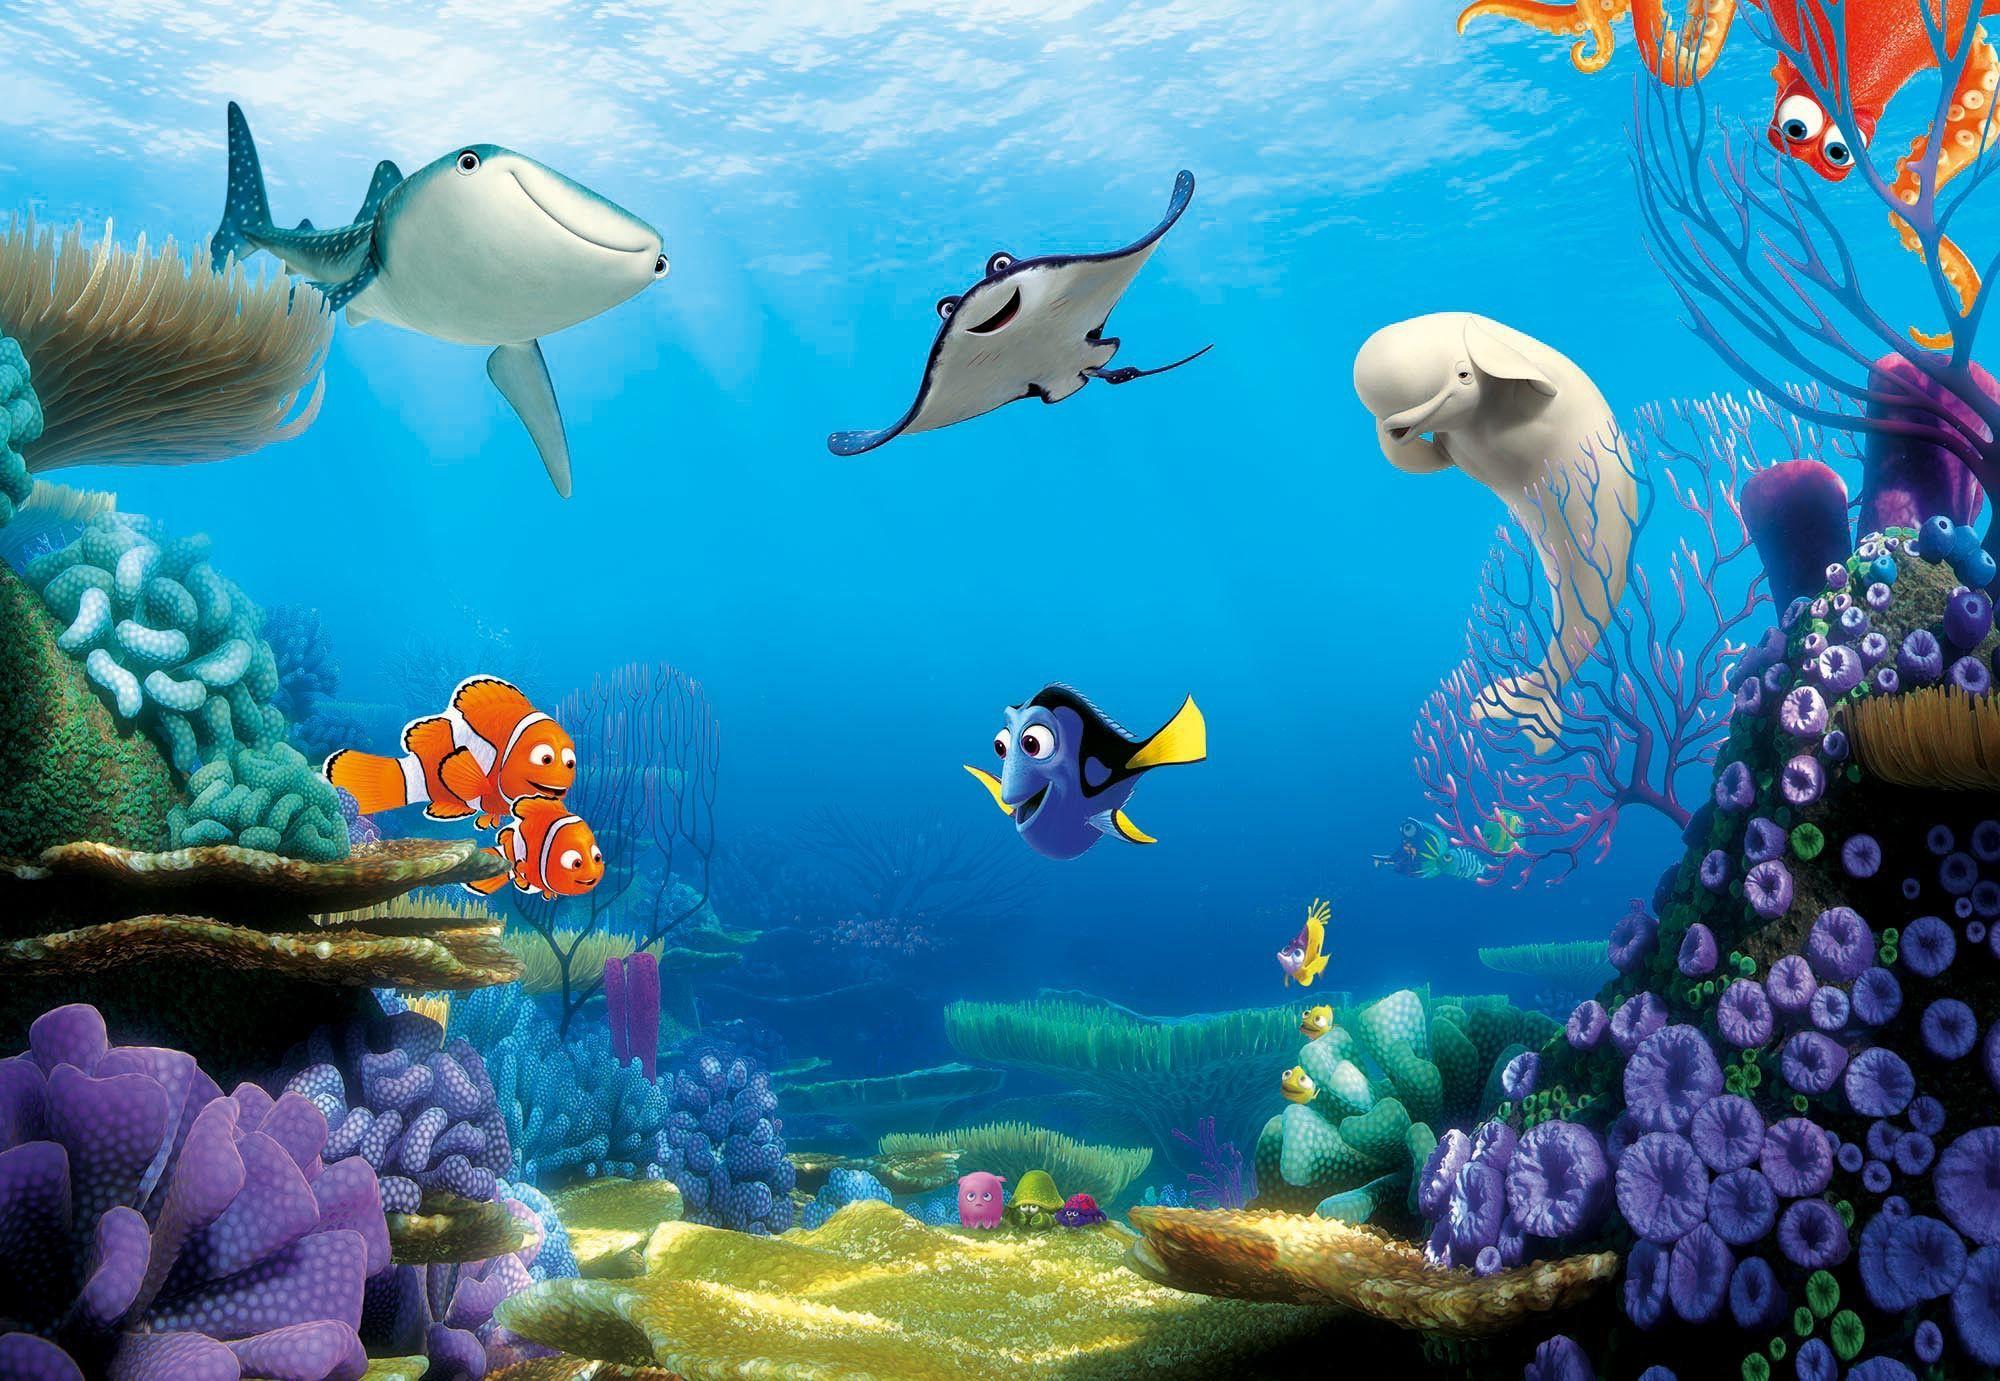 Finding Nemo Wallpapers Top Free Finding Nemo Backgrounds Wallpaperaccess 3039